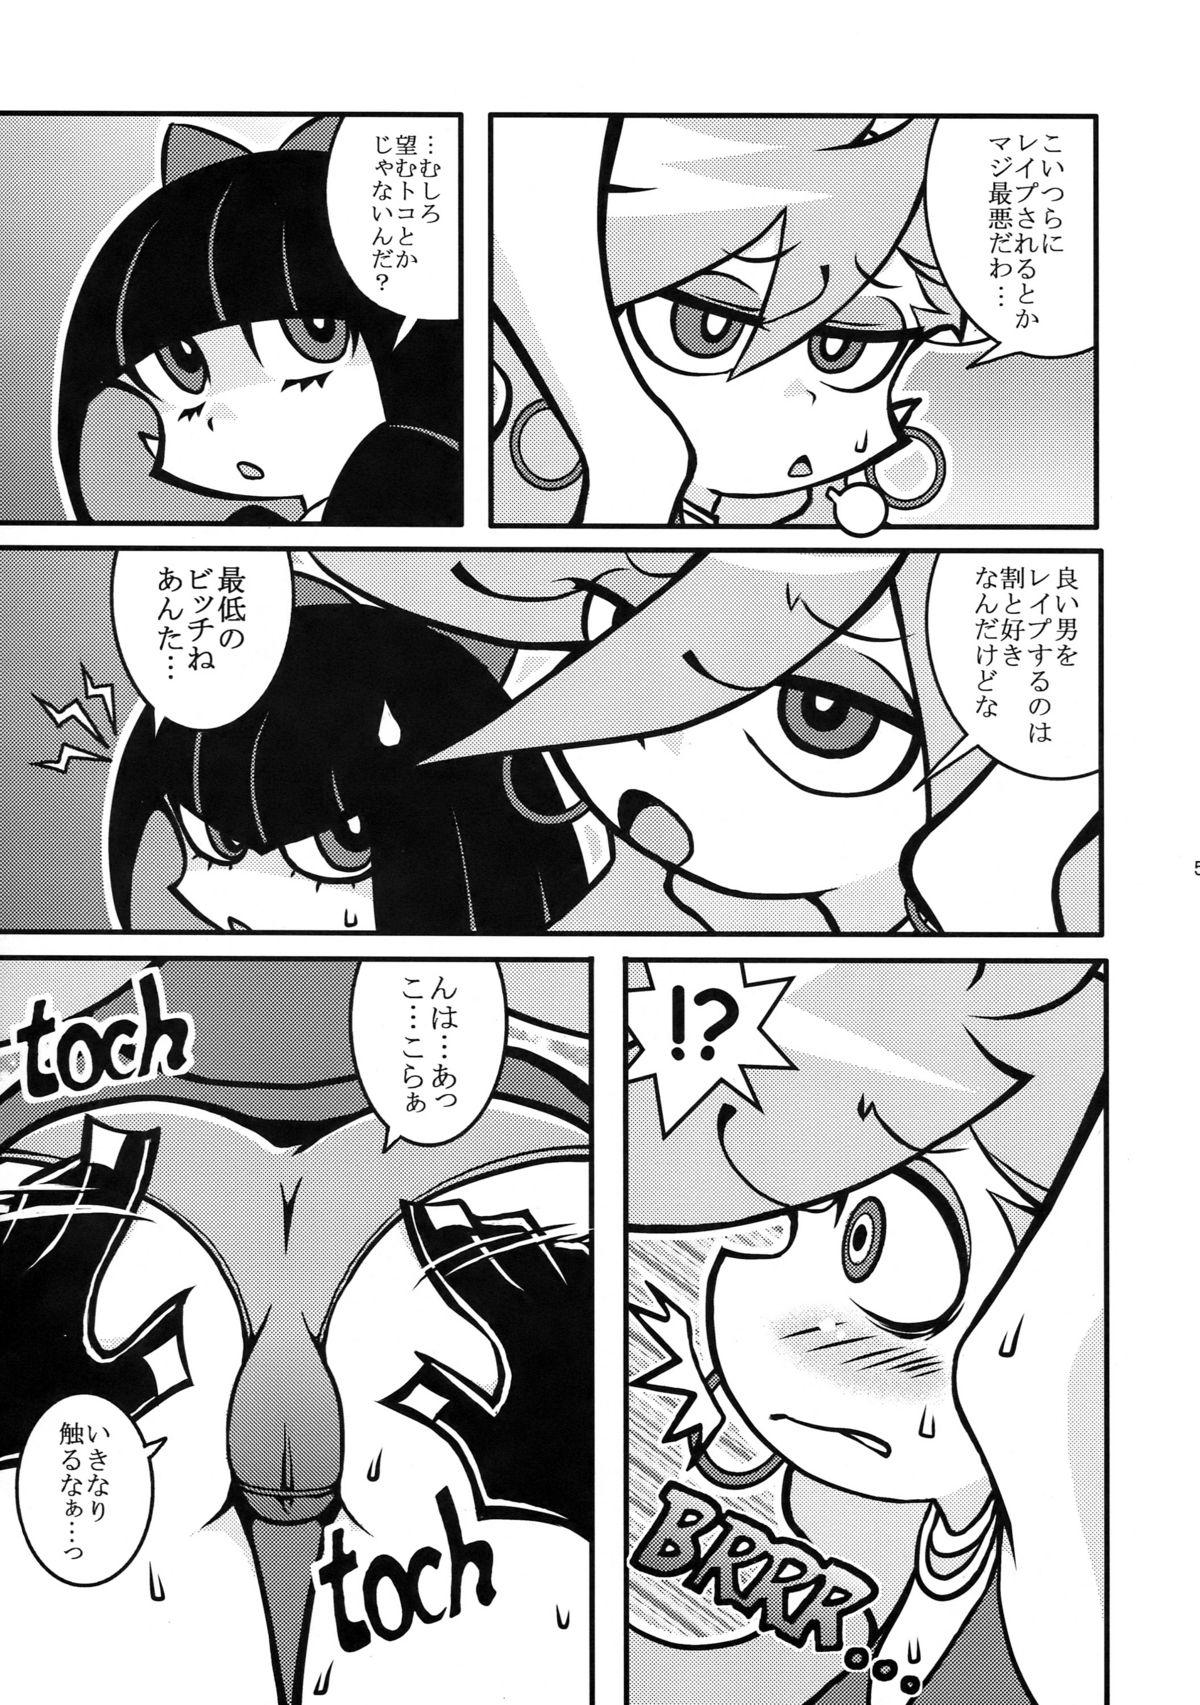 Analfucking R18 - Panty and stocking with garterbelt Scene - Page 5